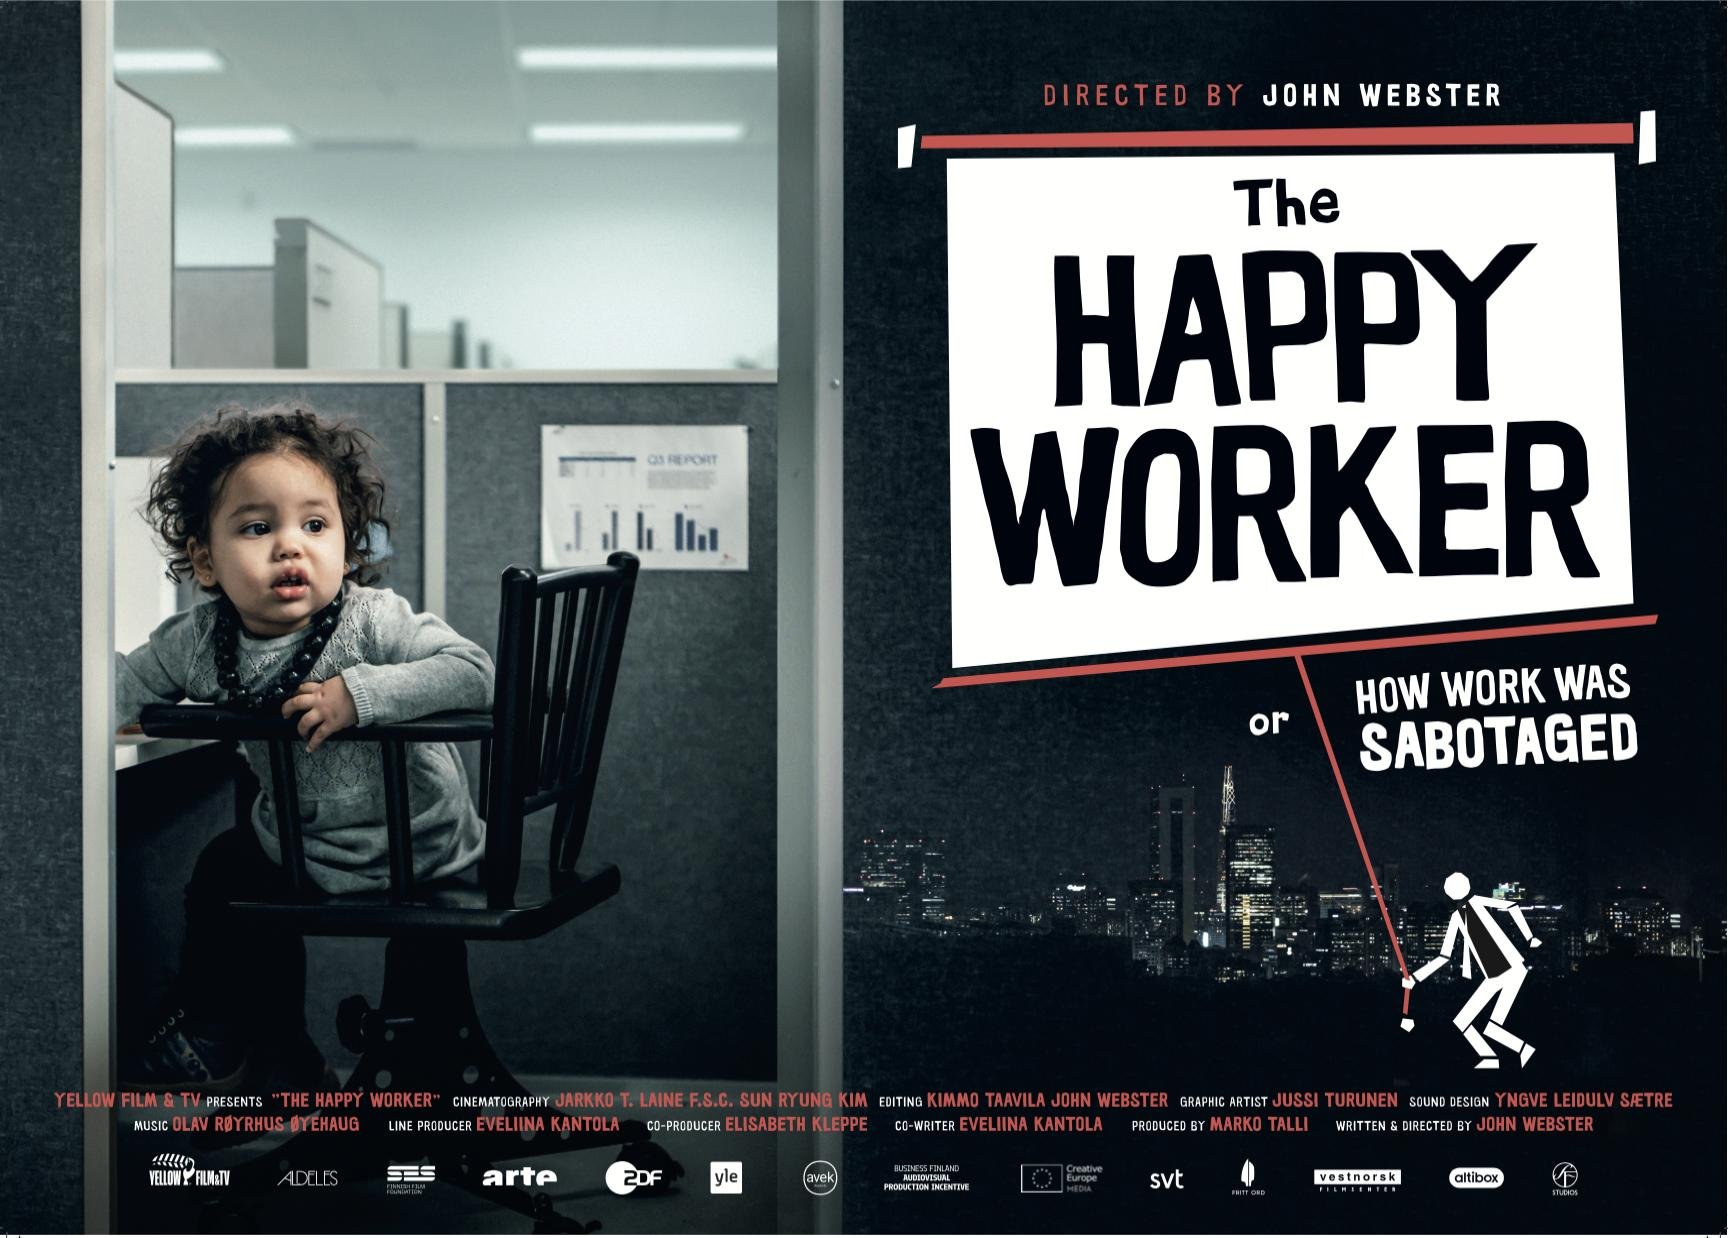 The Happy Worker